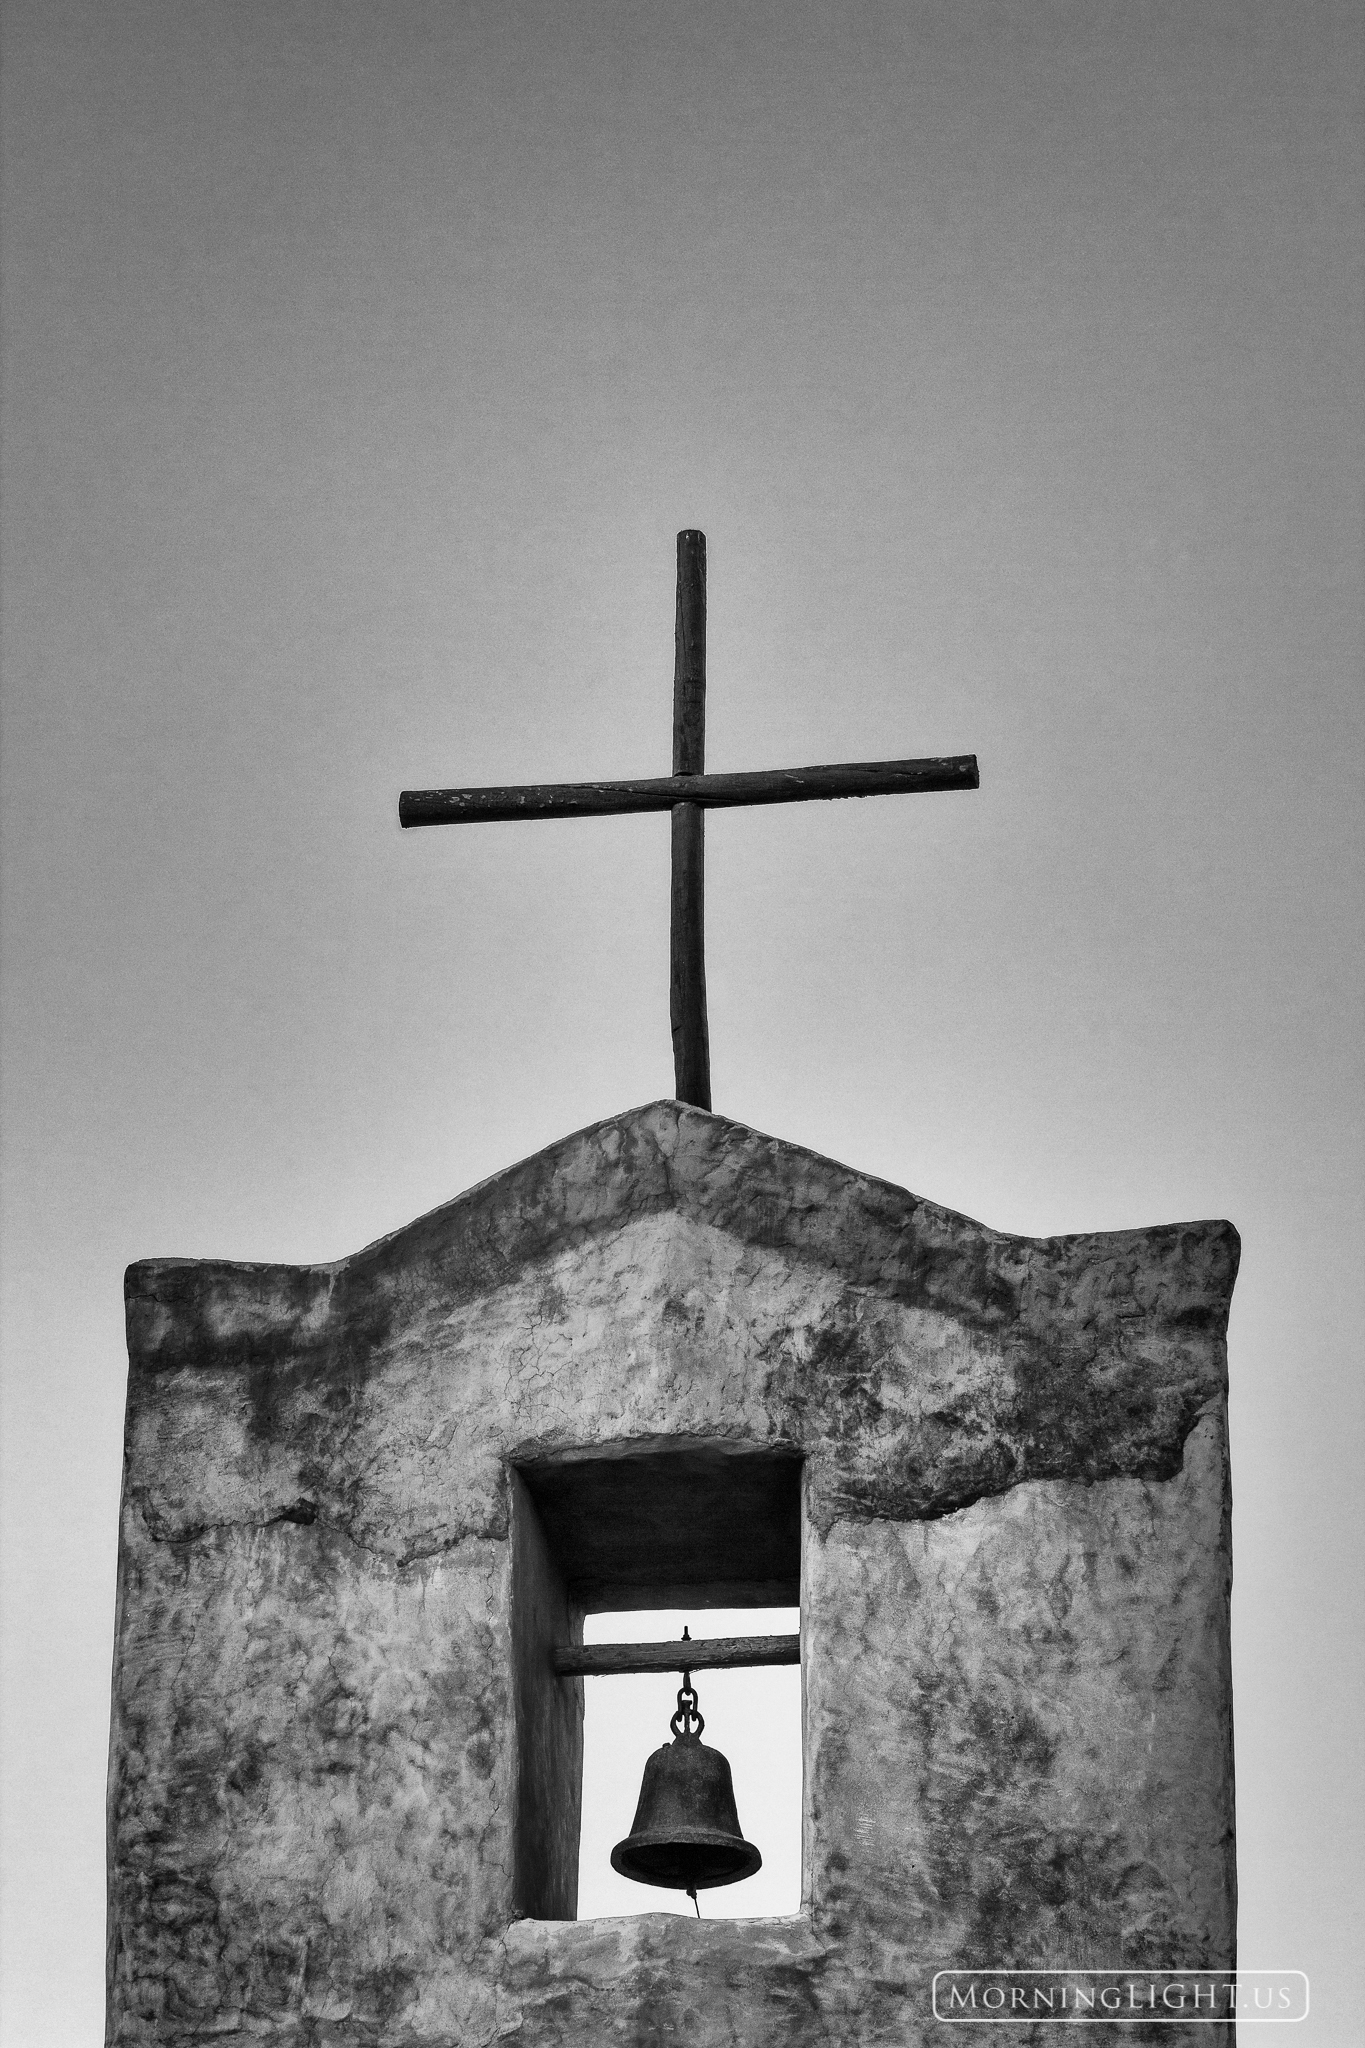 The bell tower of Christ in the Desert Monastery encourages us to lift our eyes upward to the cross to remember that which is...